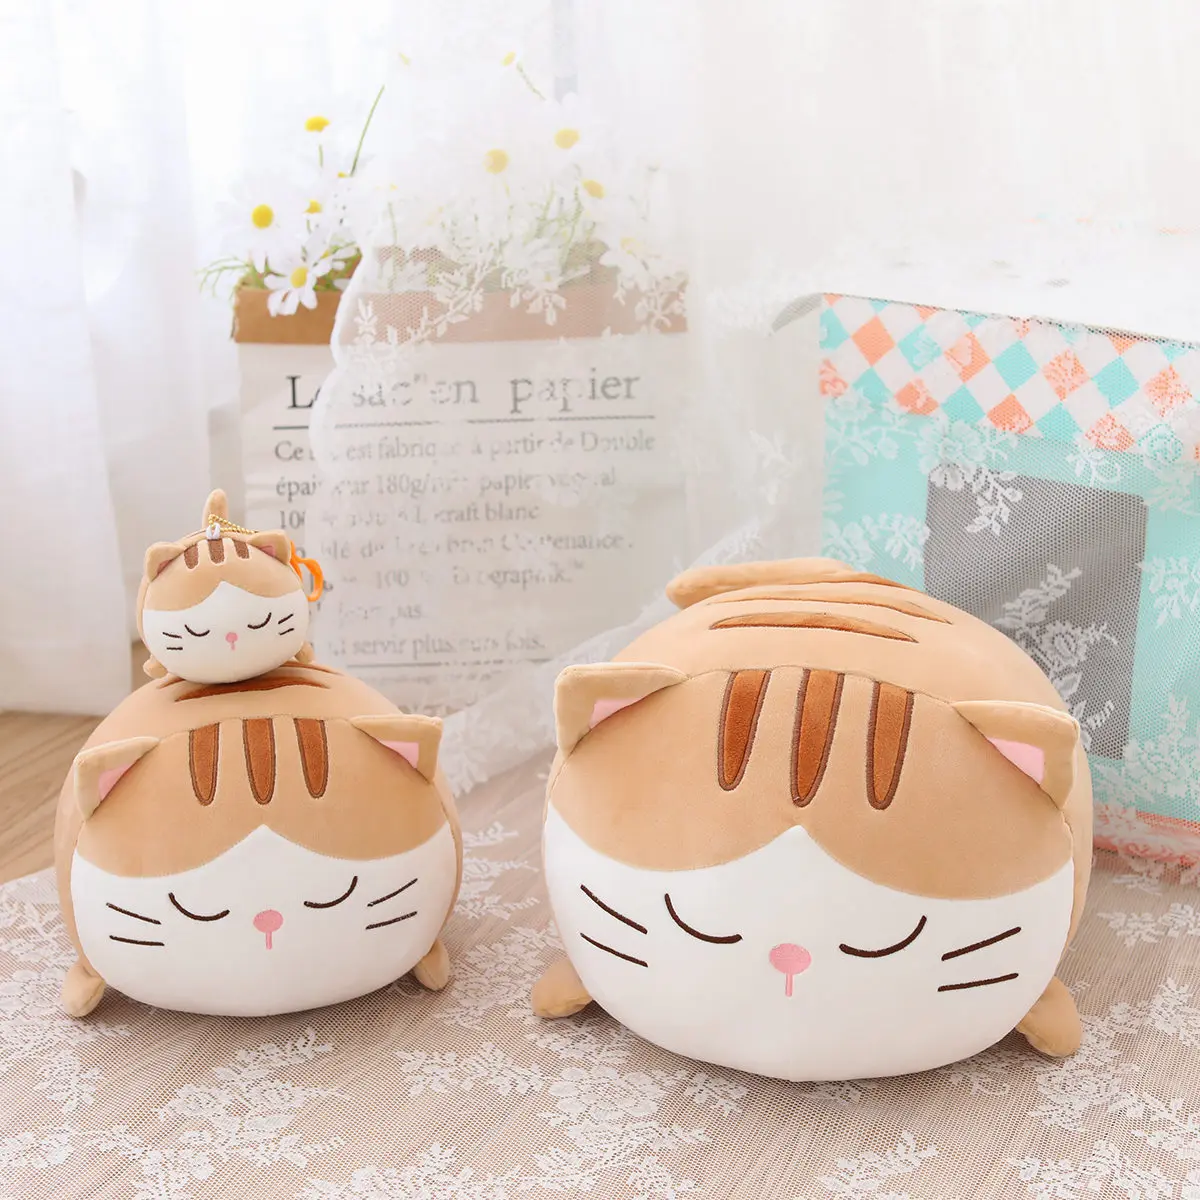 New Arrival Fat Cute Soft Stuffed Plush Cat Elastic Fluffy Pillow For Kids Gift Ready in Stock